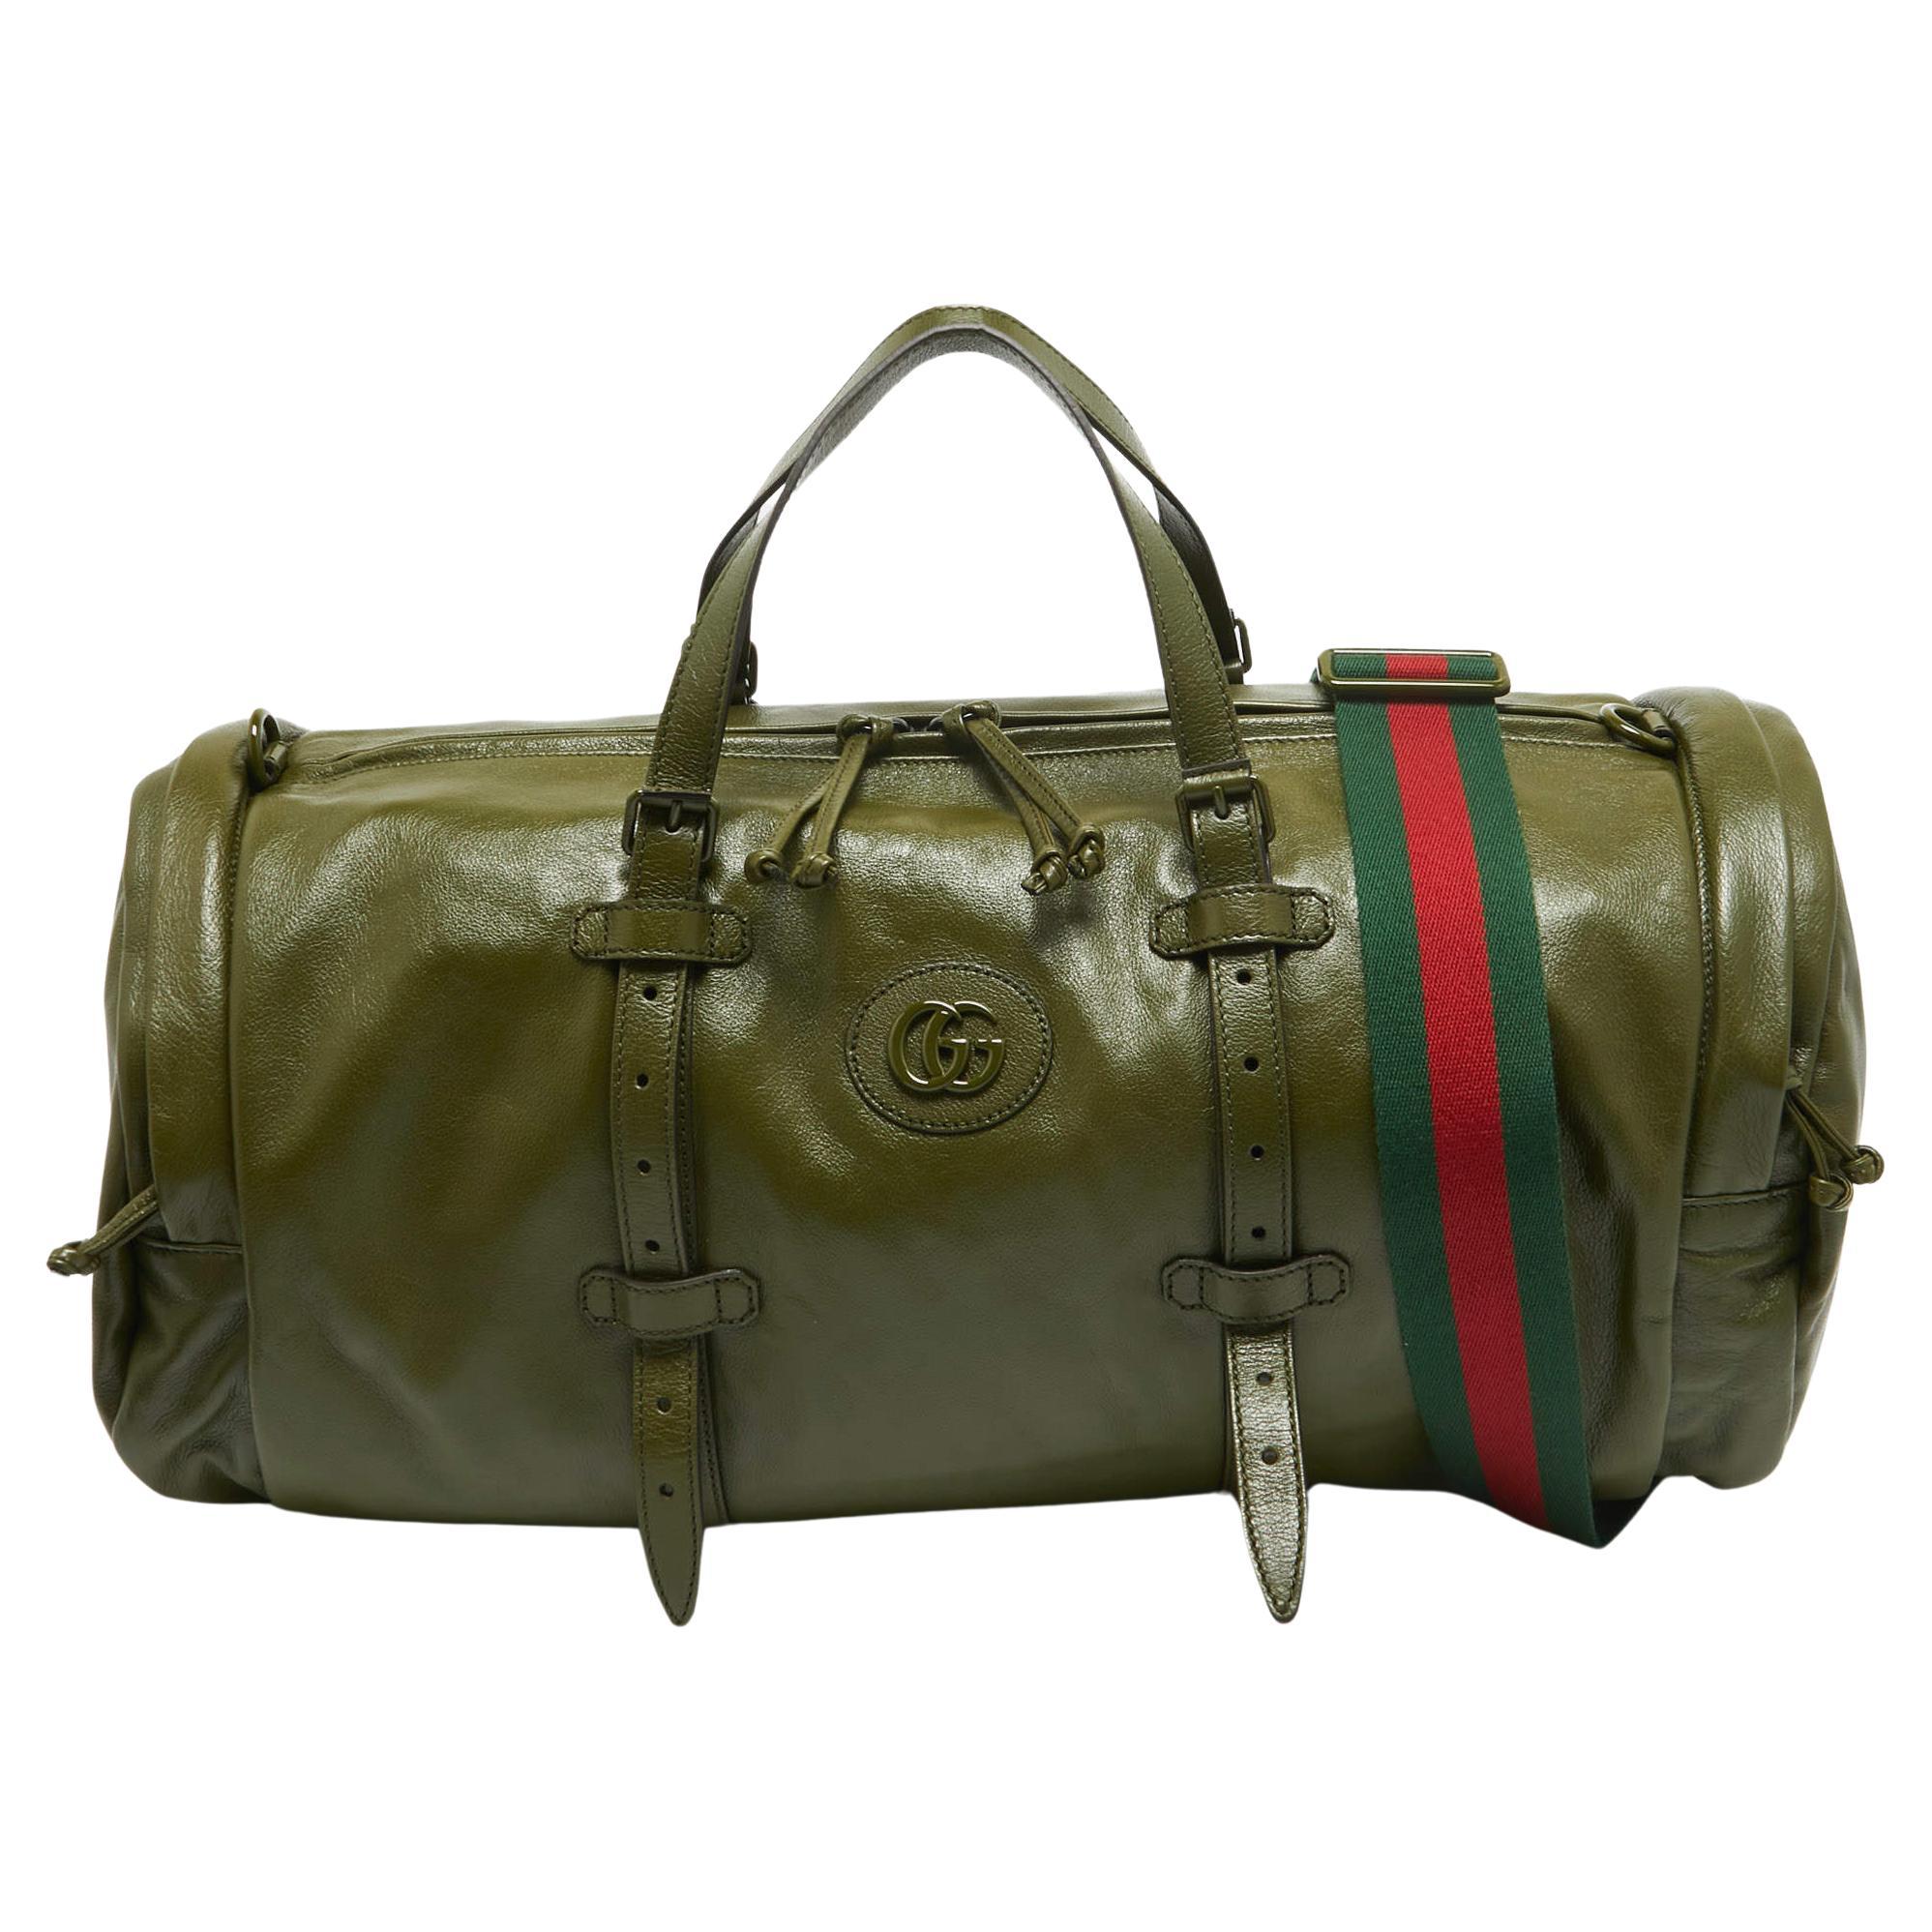 Gucci Green Leather Large Tonal Double G Duffle Bag For Sale